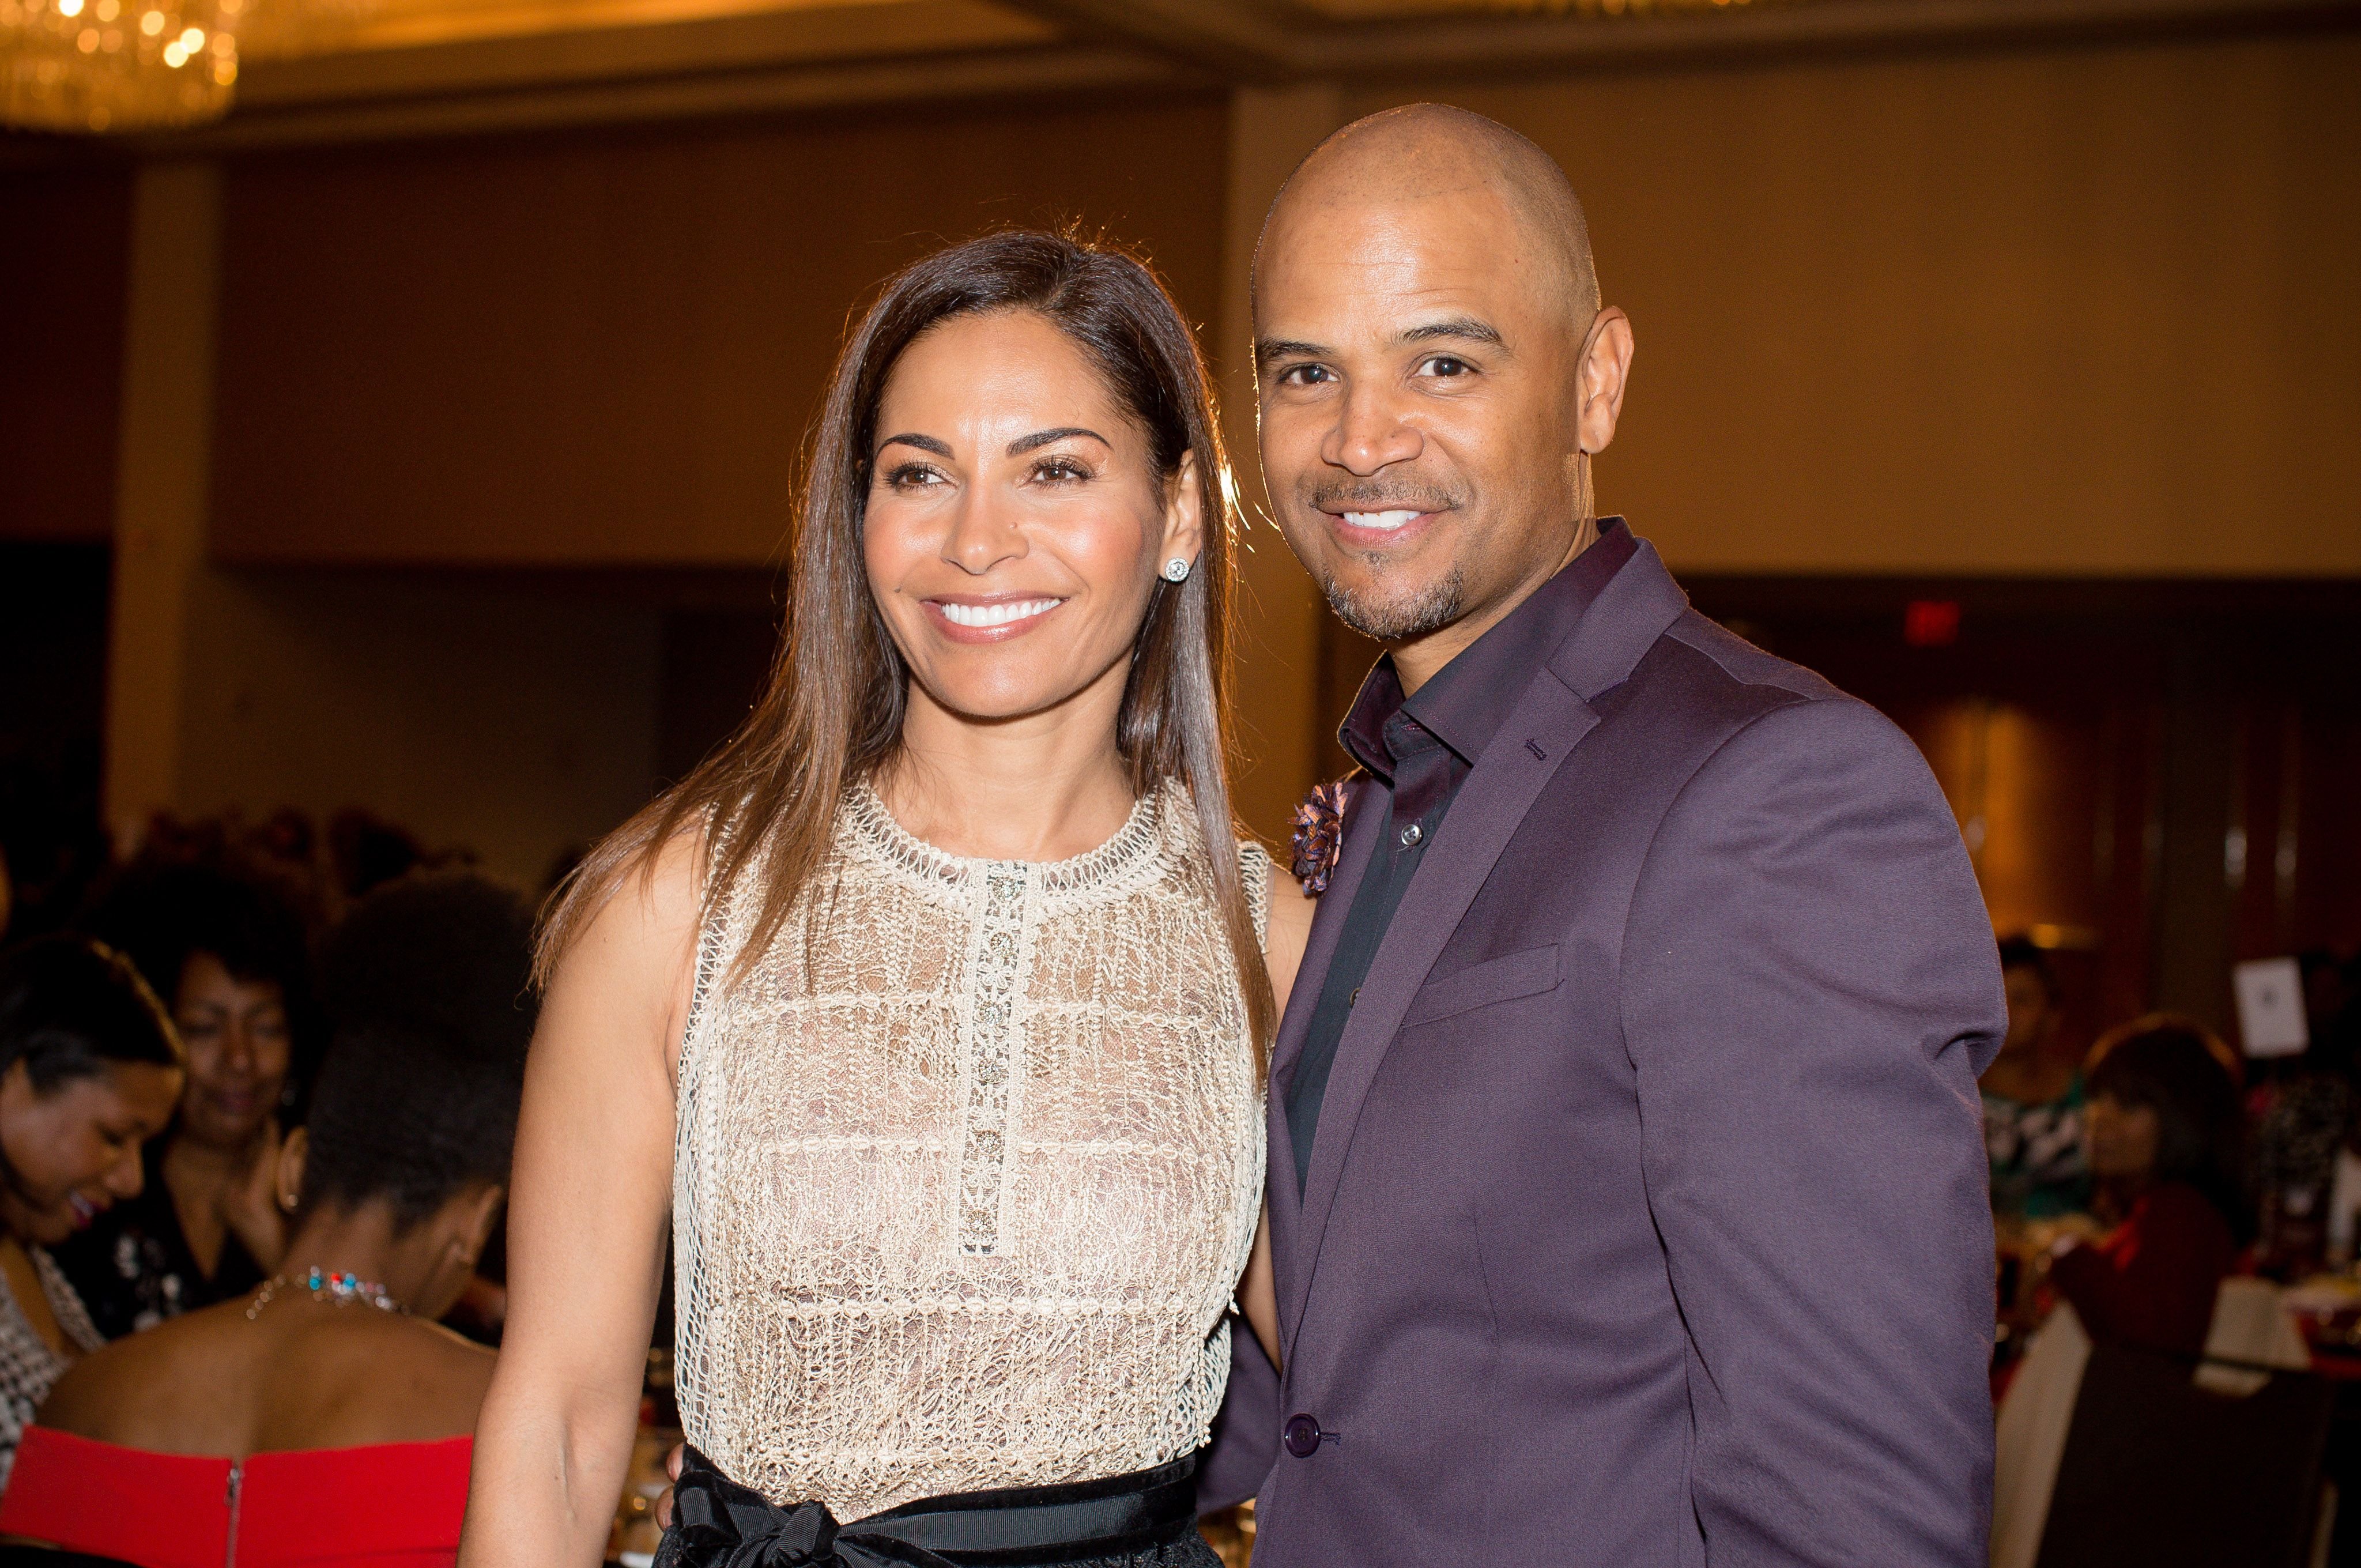 Salli Richardson Whitfield and Dondre Whitfield at the 2017 Black Women Film Summit awards luncheon at Atlanta Marriott Marquis on March 3, 2017 | Photo: Getty Images